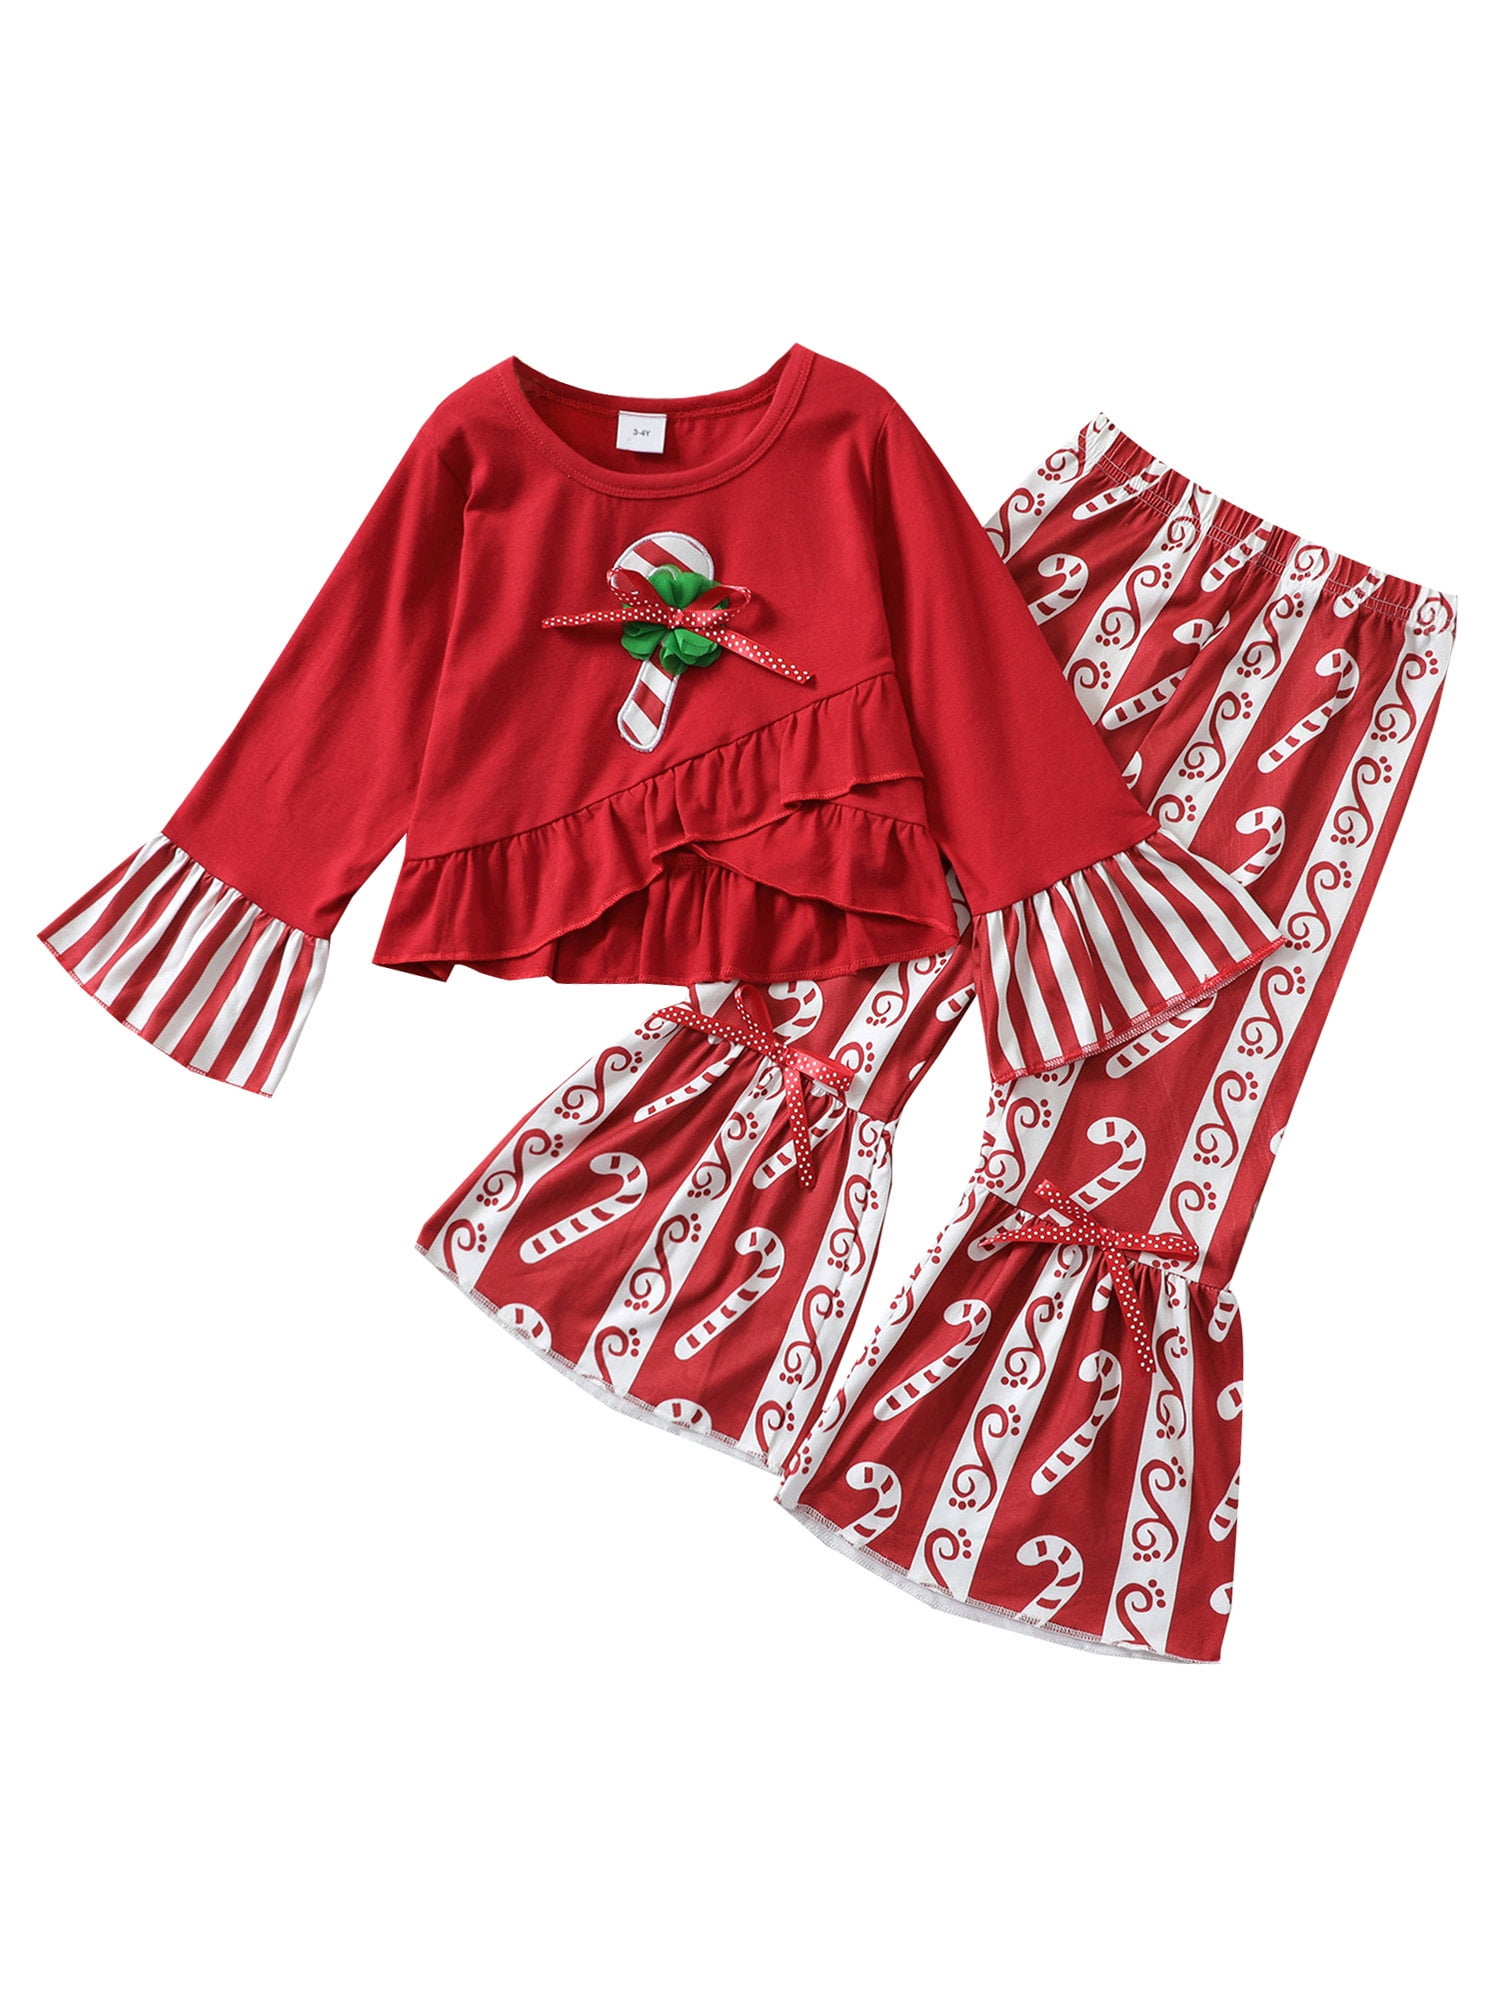 2PCS Toddler Baby Girls Christmas Outfits tops+pants Kids Clothes set